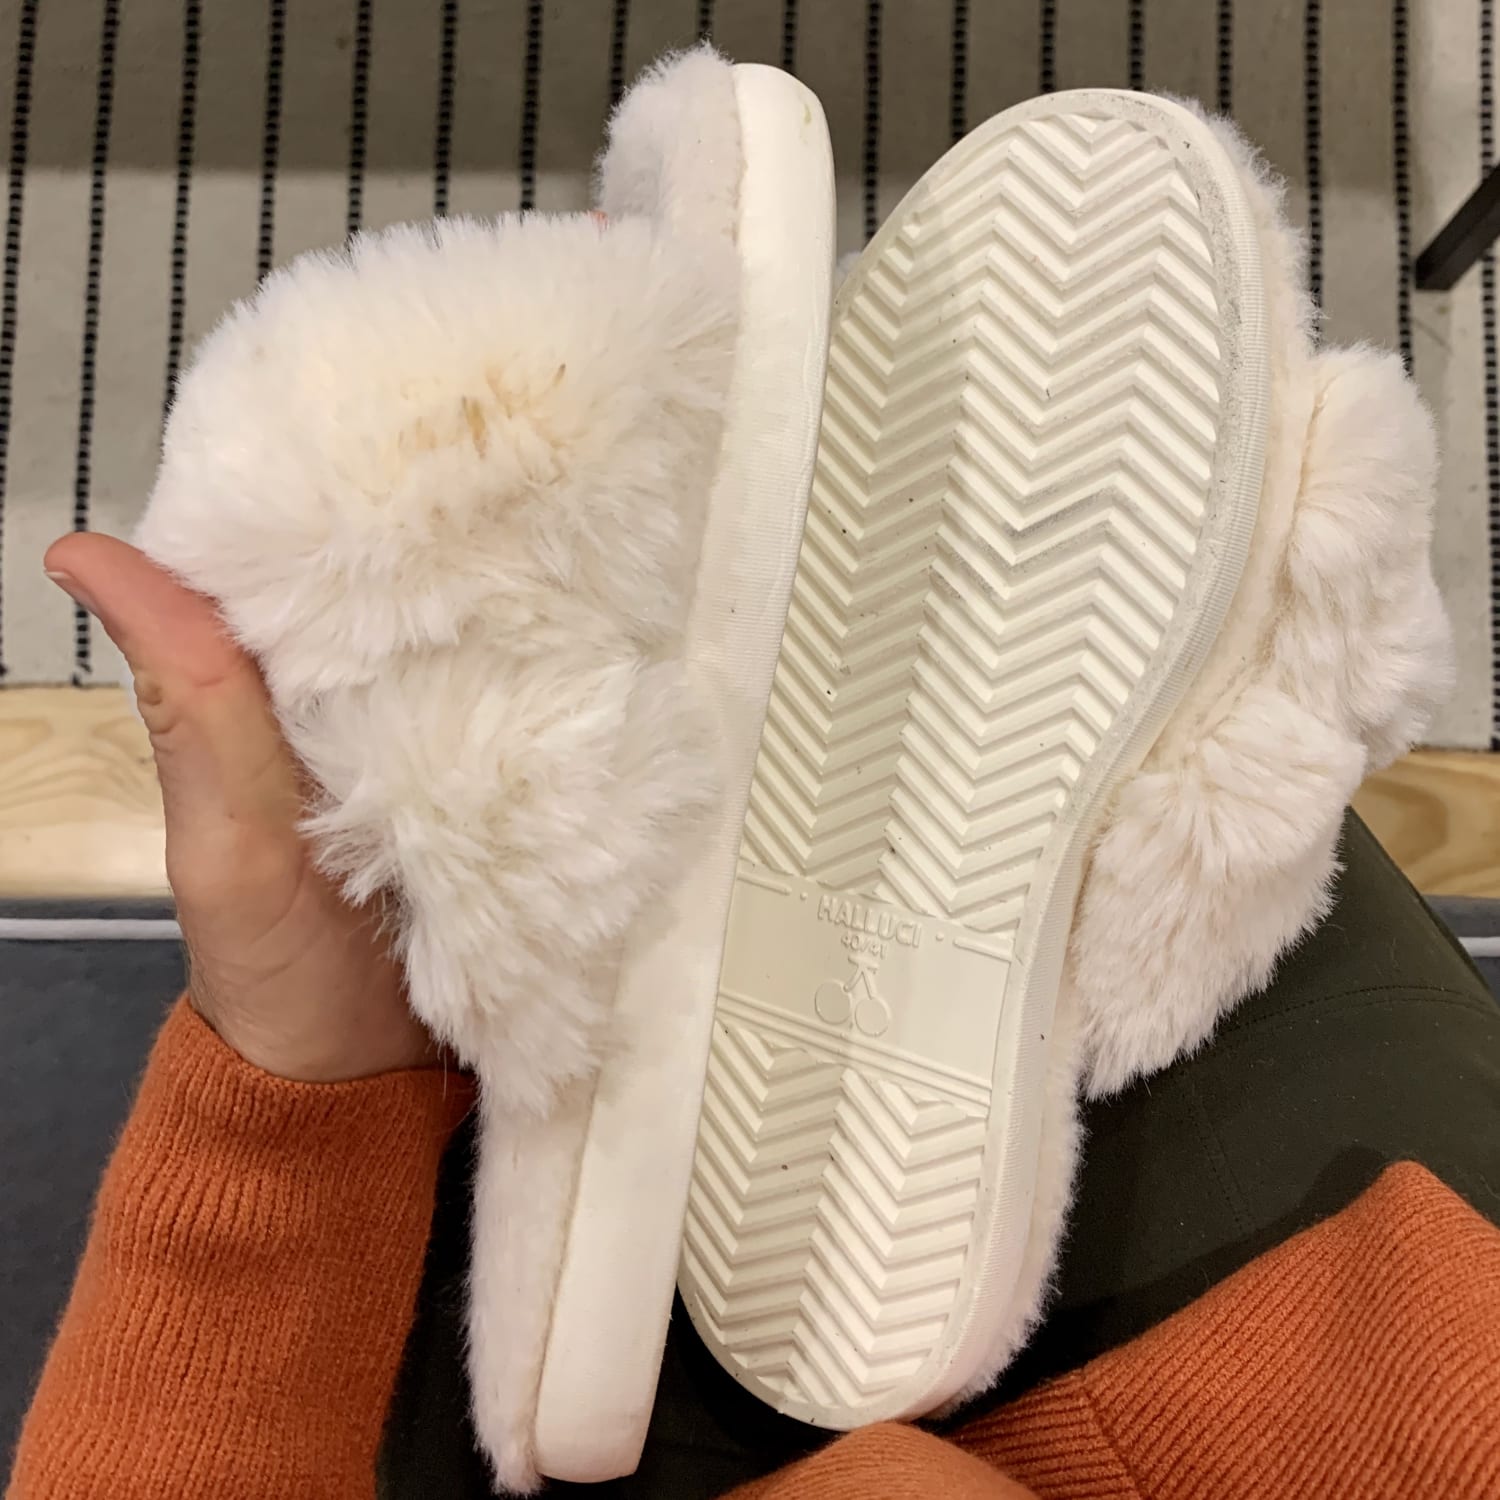 These fleece slippers are perfect for fall — and just $22